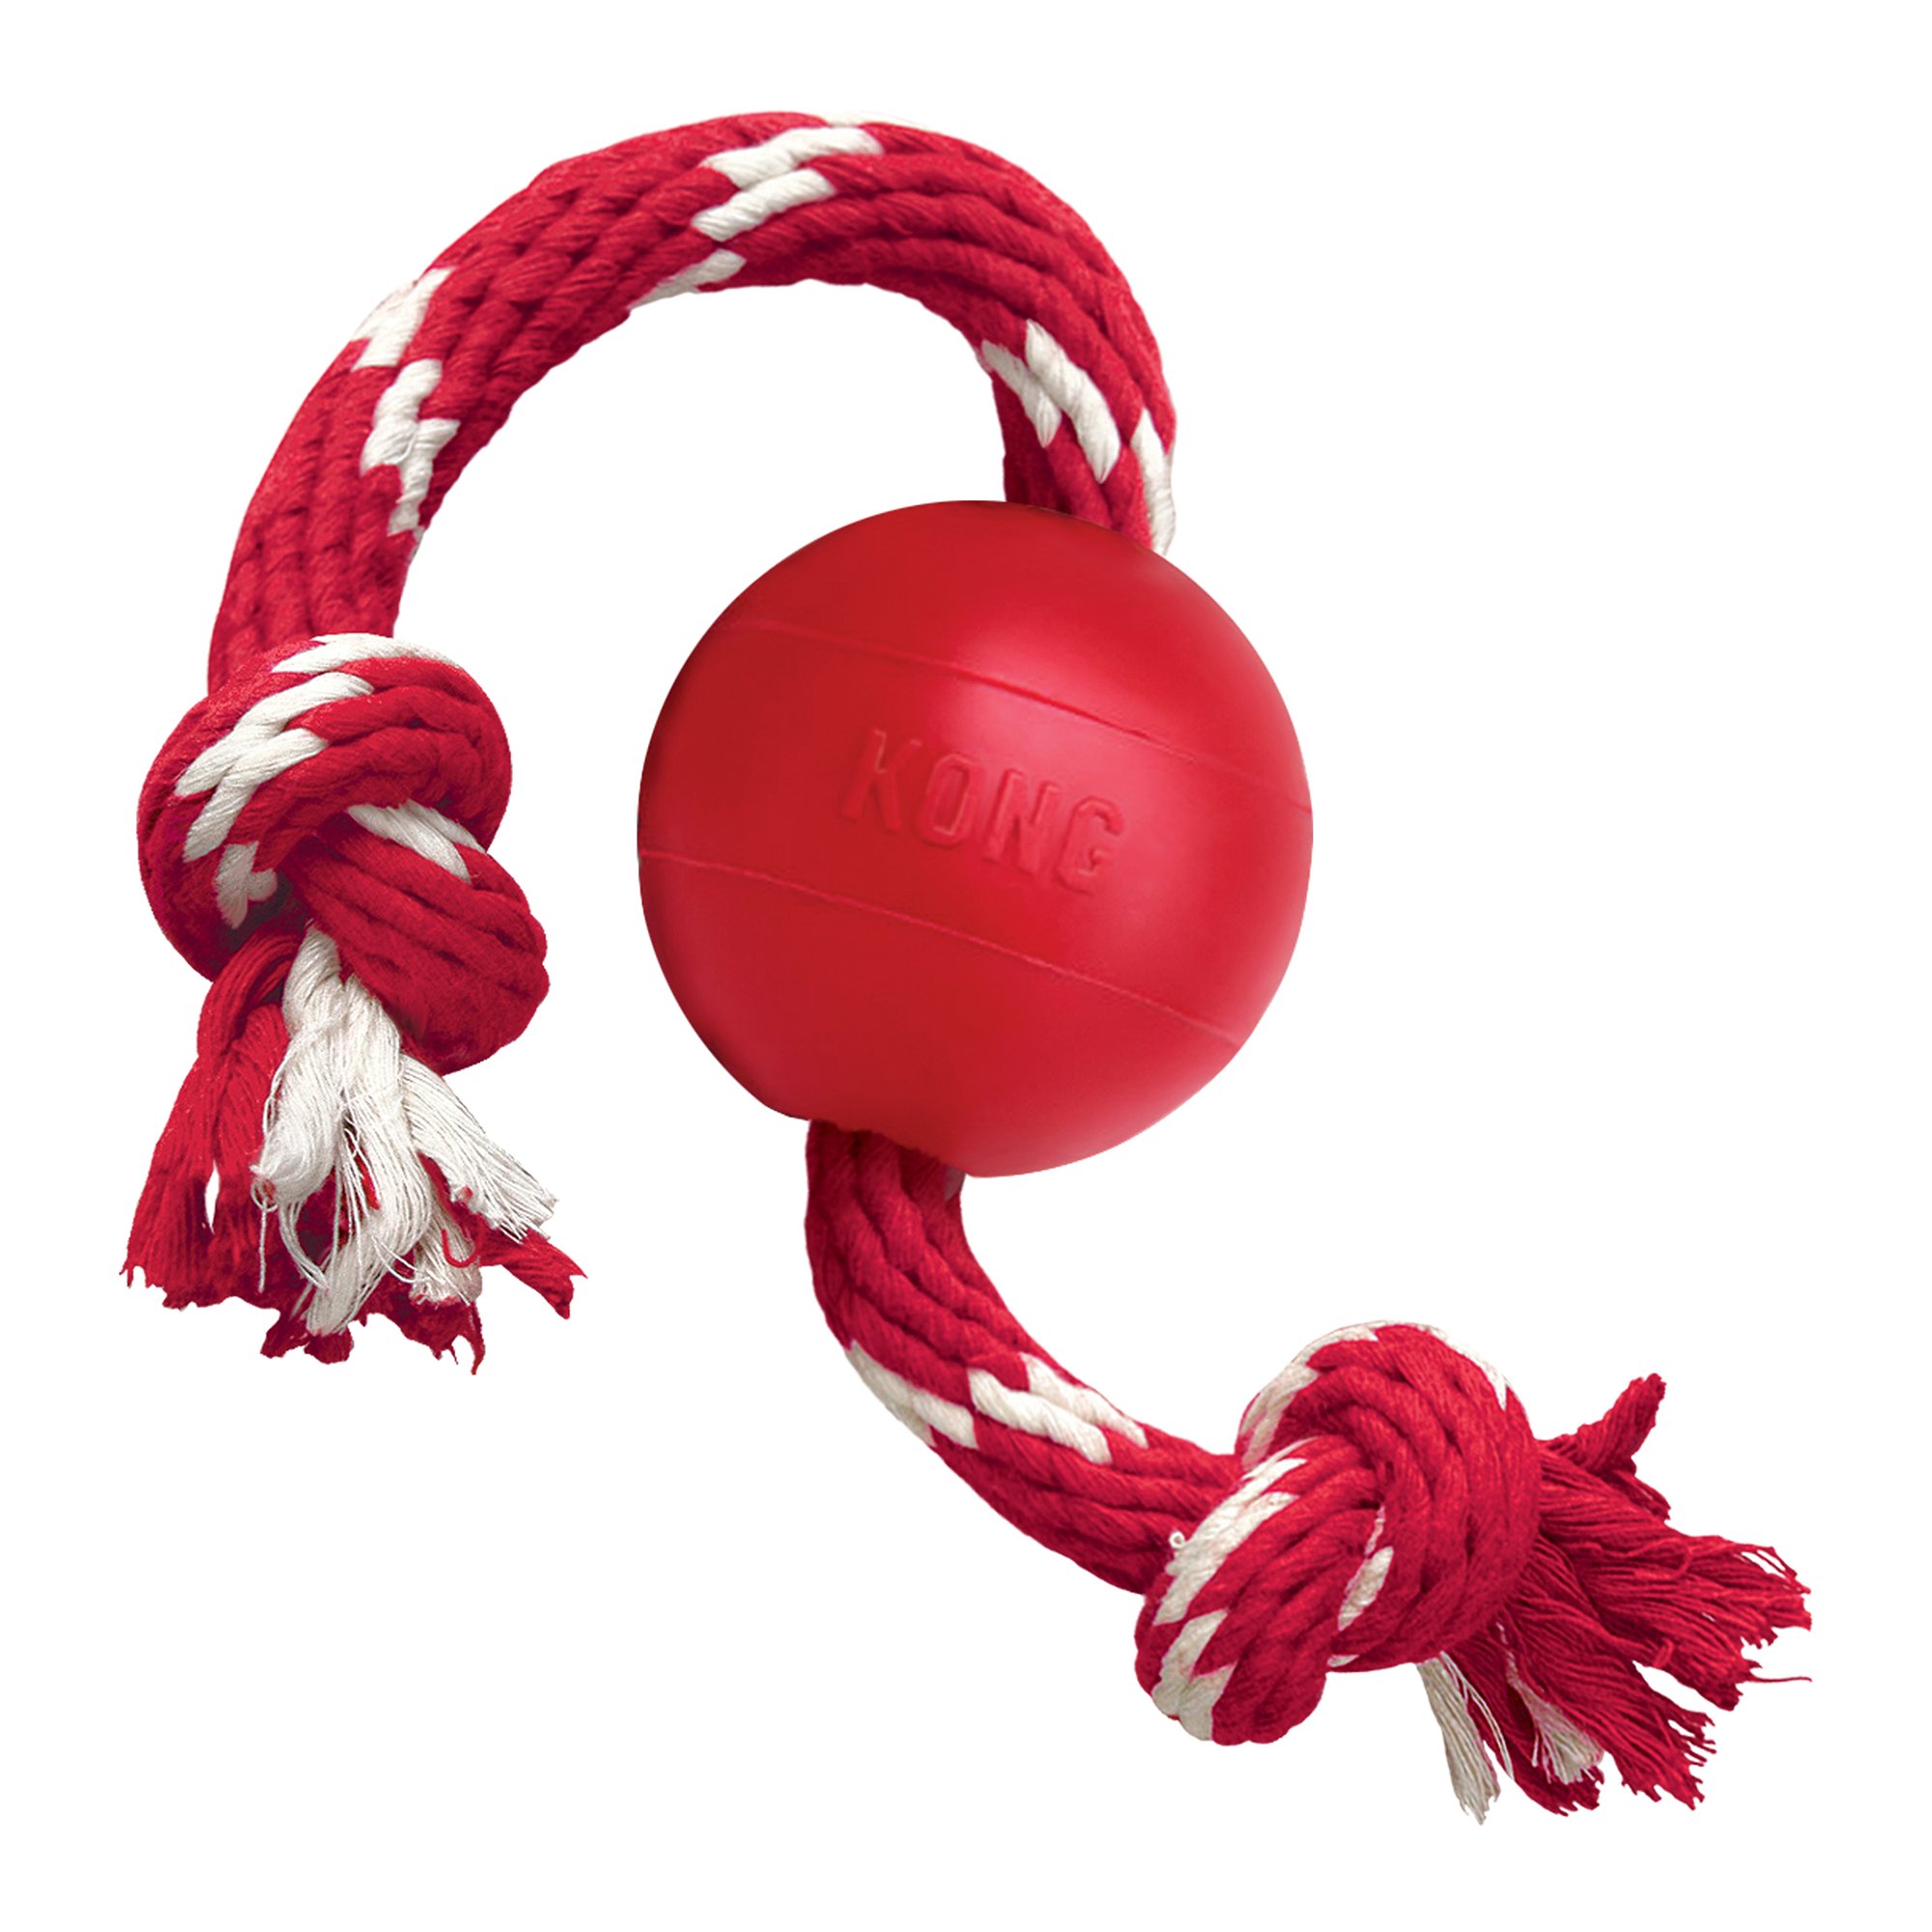  Red Hard Ball with Rope S 